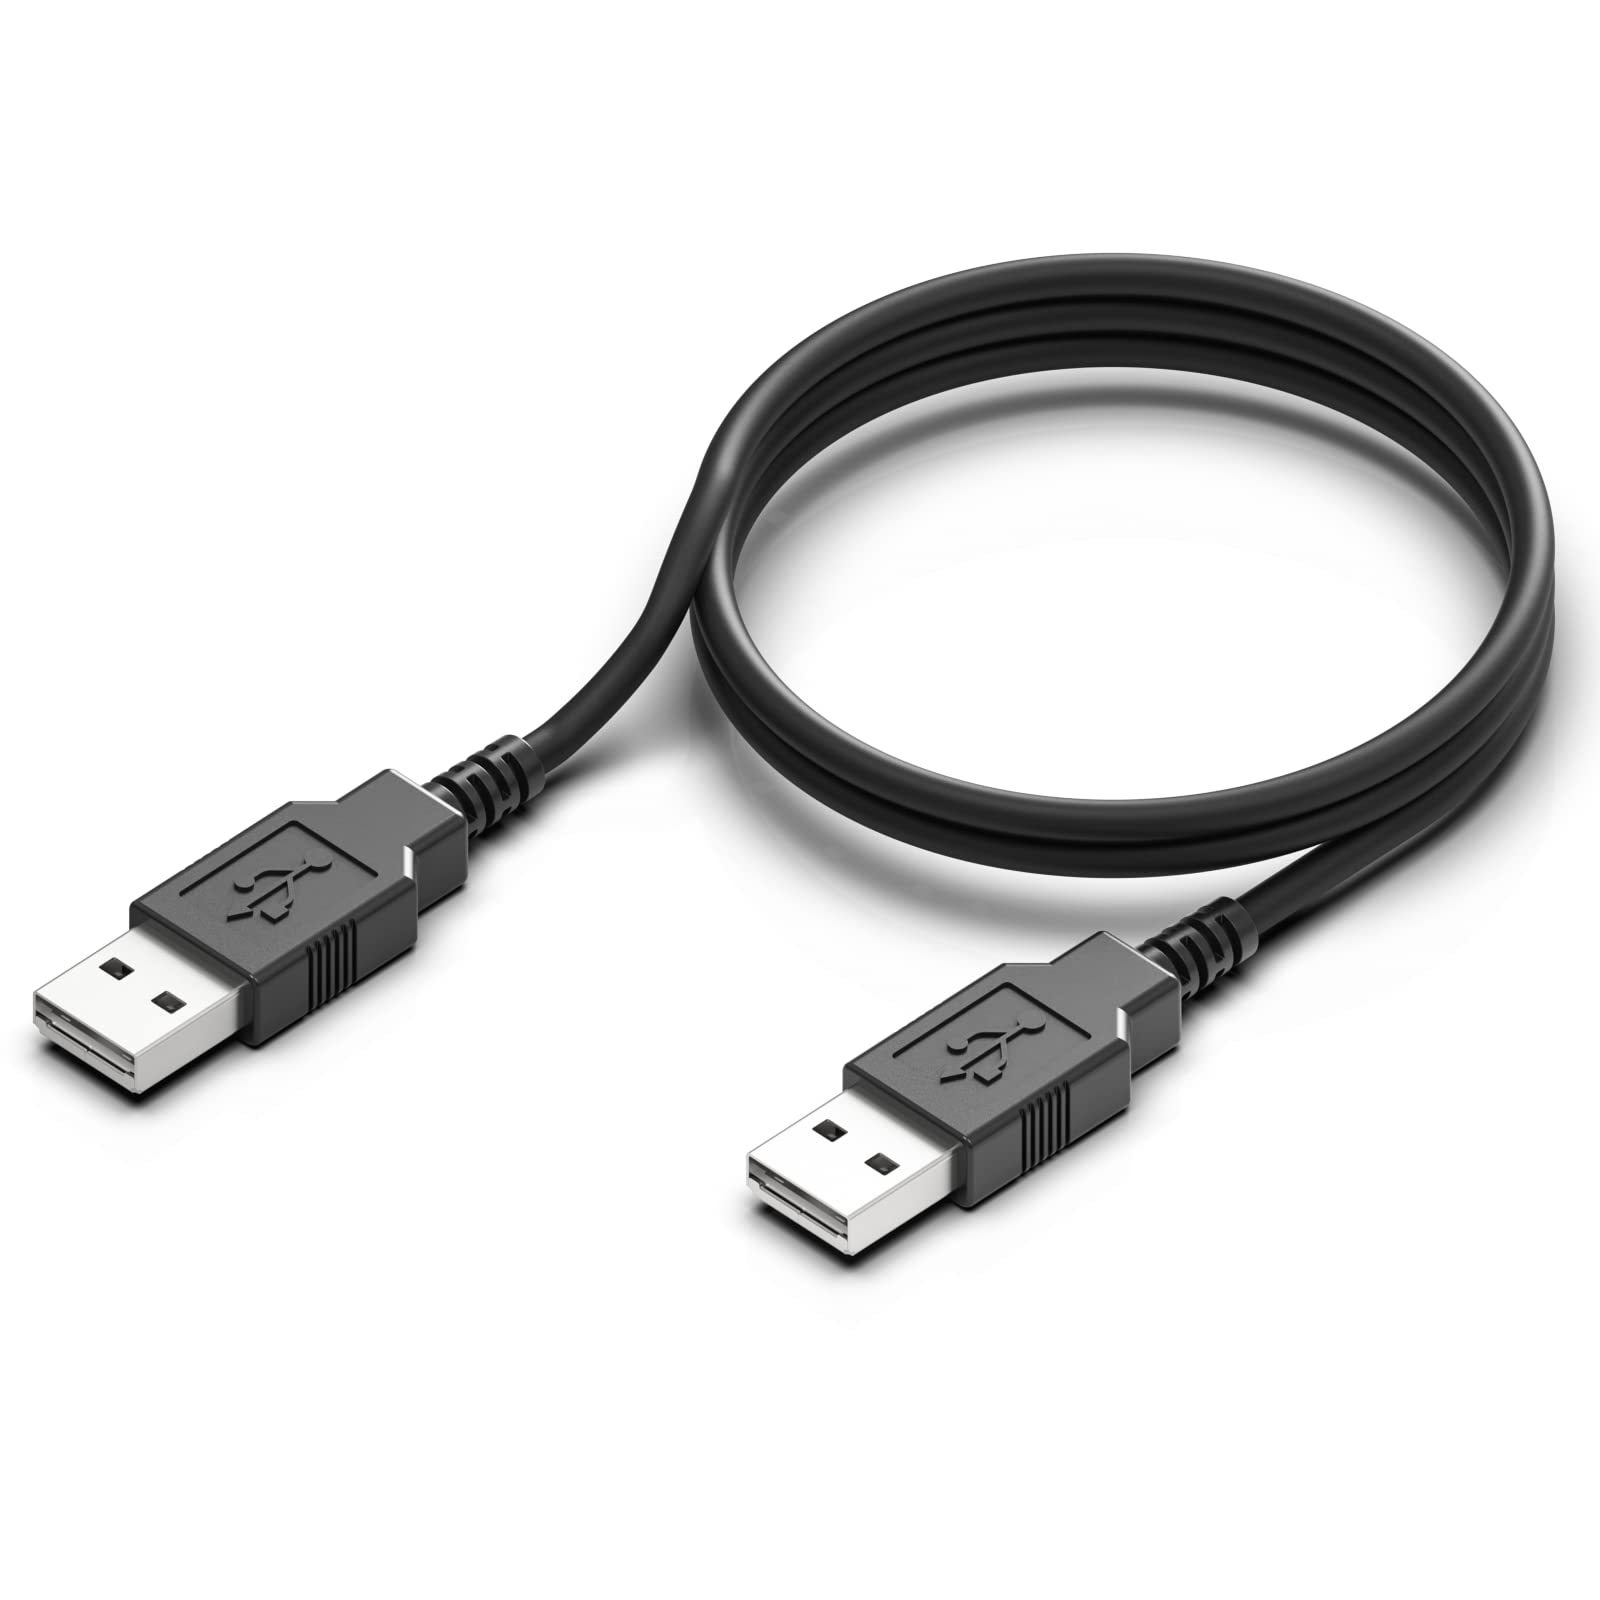 Lapster 1.5 mtr USB 2.0 Type A Male to USB A Male Cable for computer and